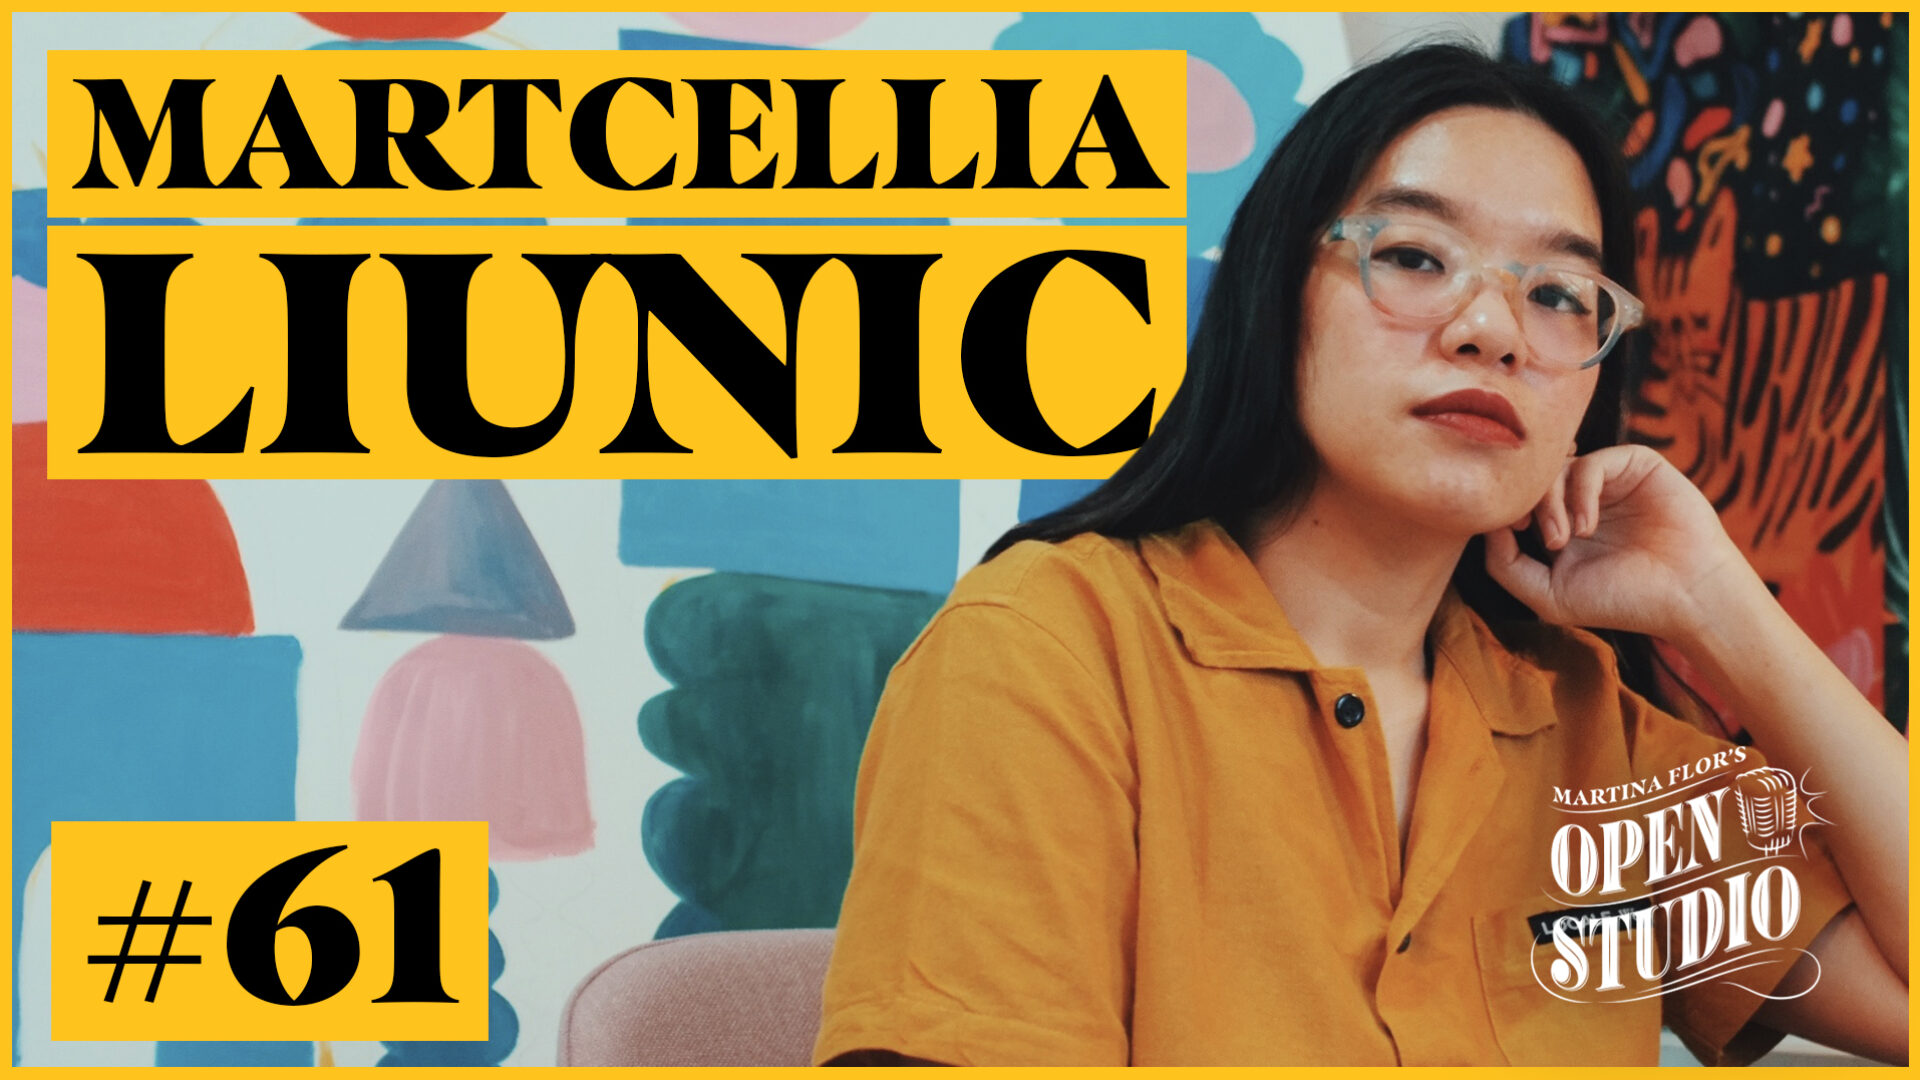 61. Martcellia Liunic – How to Start an Art Based Online Shop, Landing Brand Collaborations and more